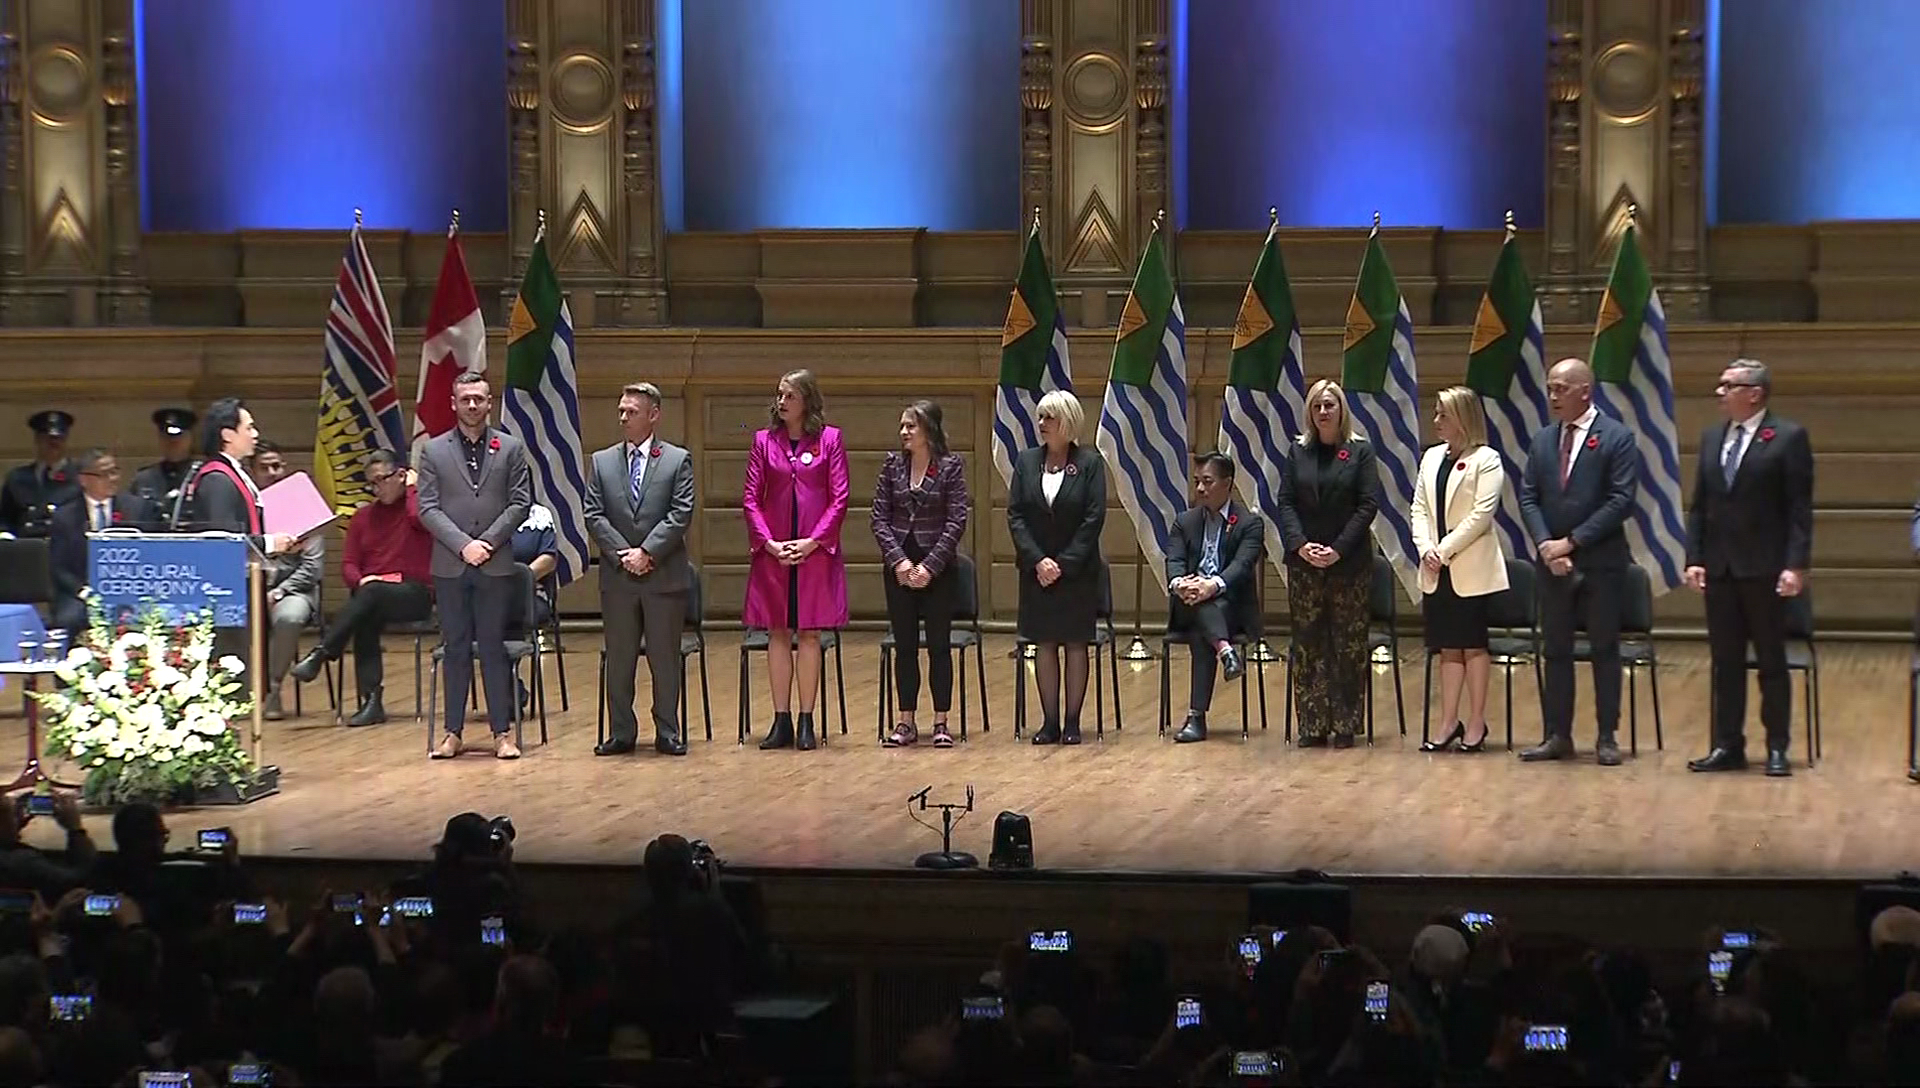 Vancouver's new city council is sworn in